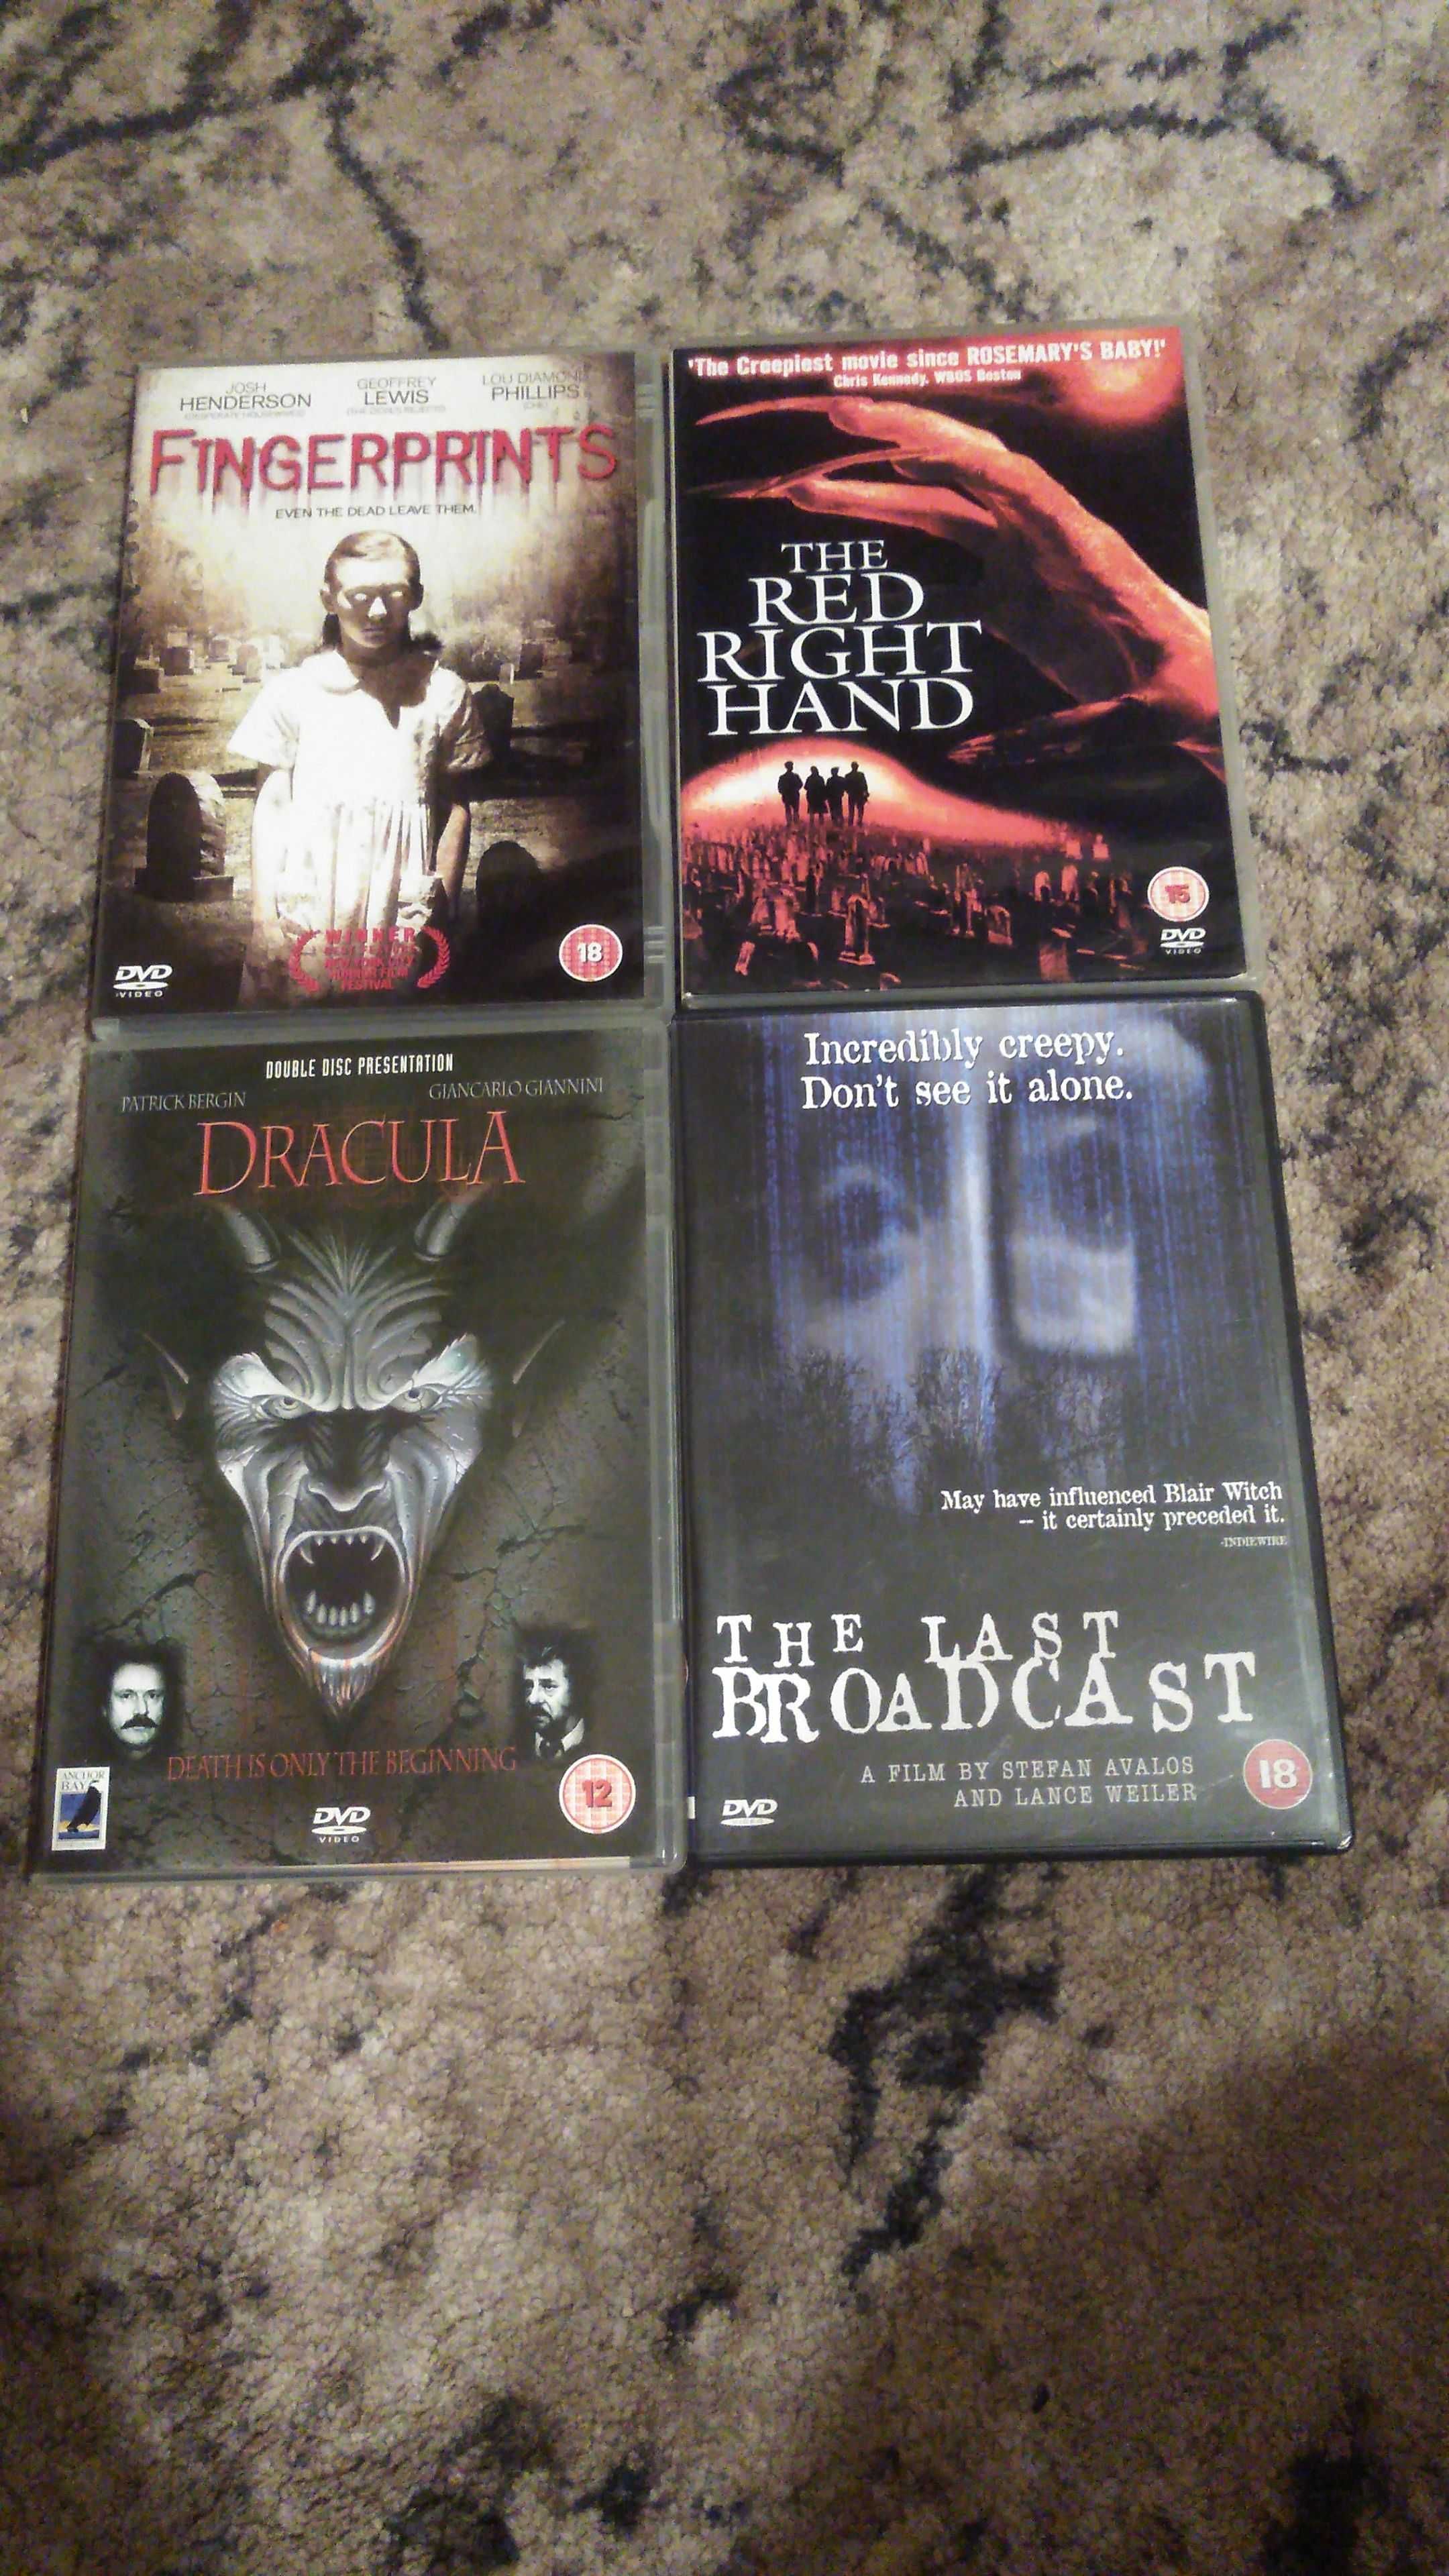 Fingerprints / The Red Right Hand / Dracula / The Last Broadcast